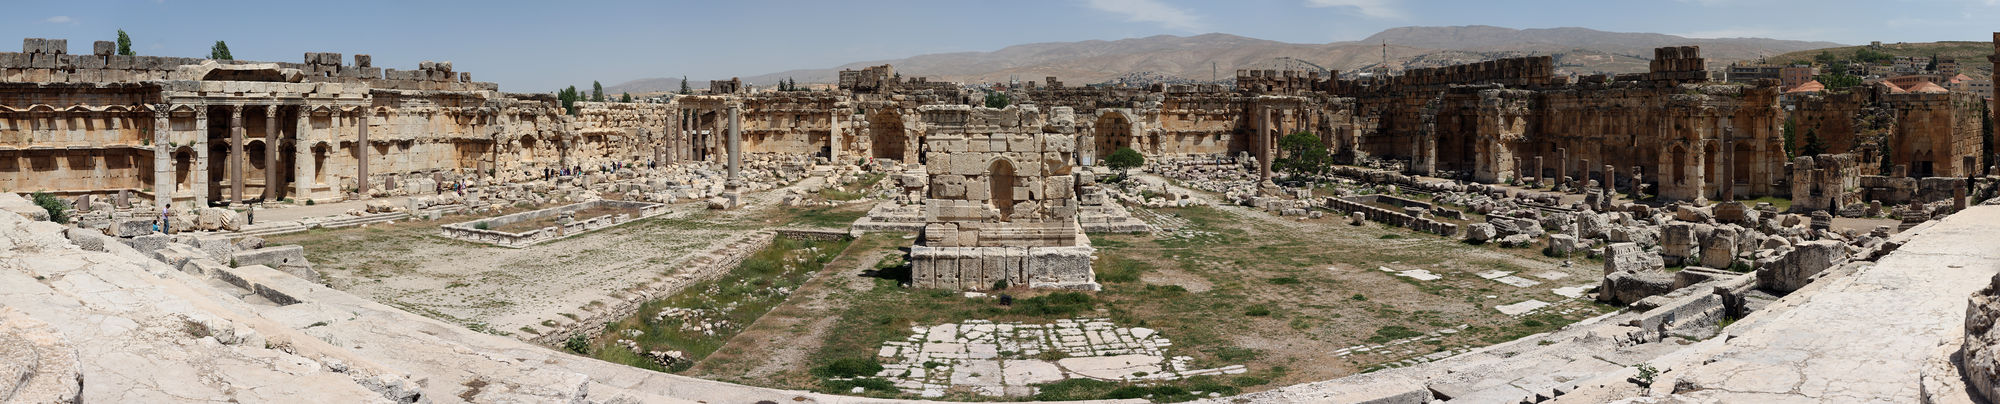 Panoramatický pohled na Baalbeck